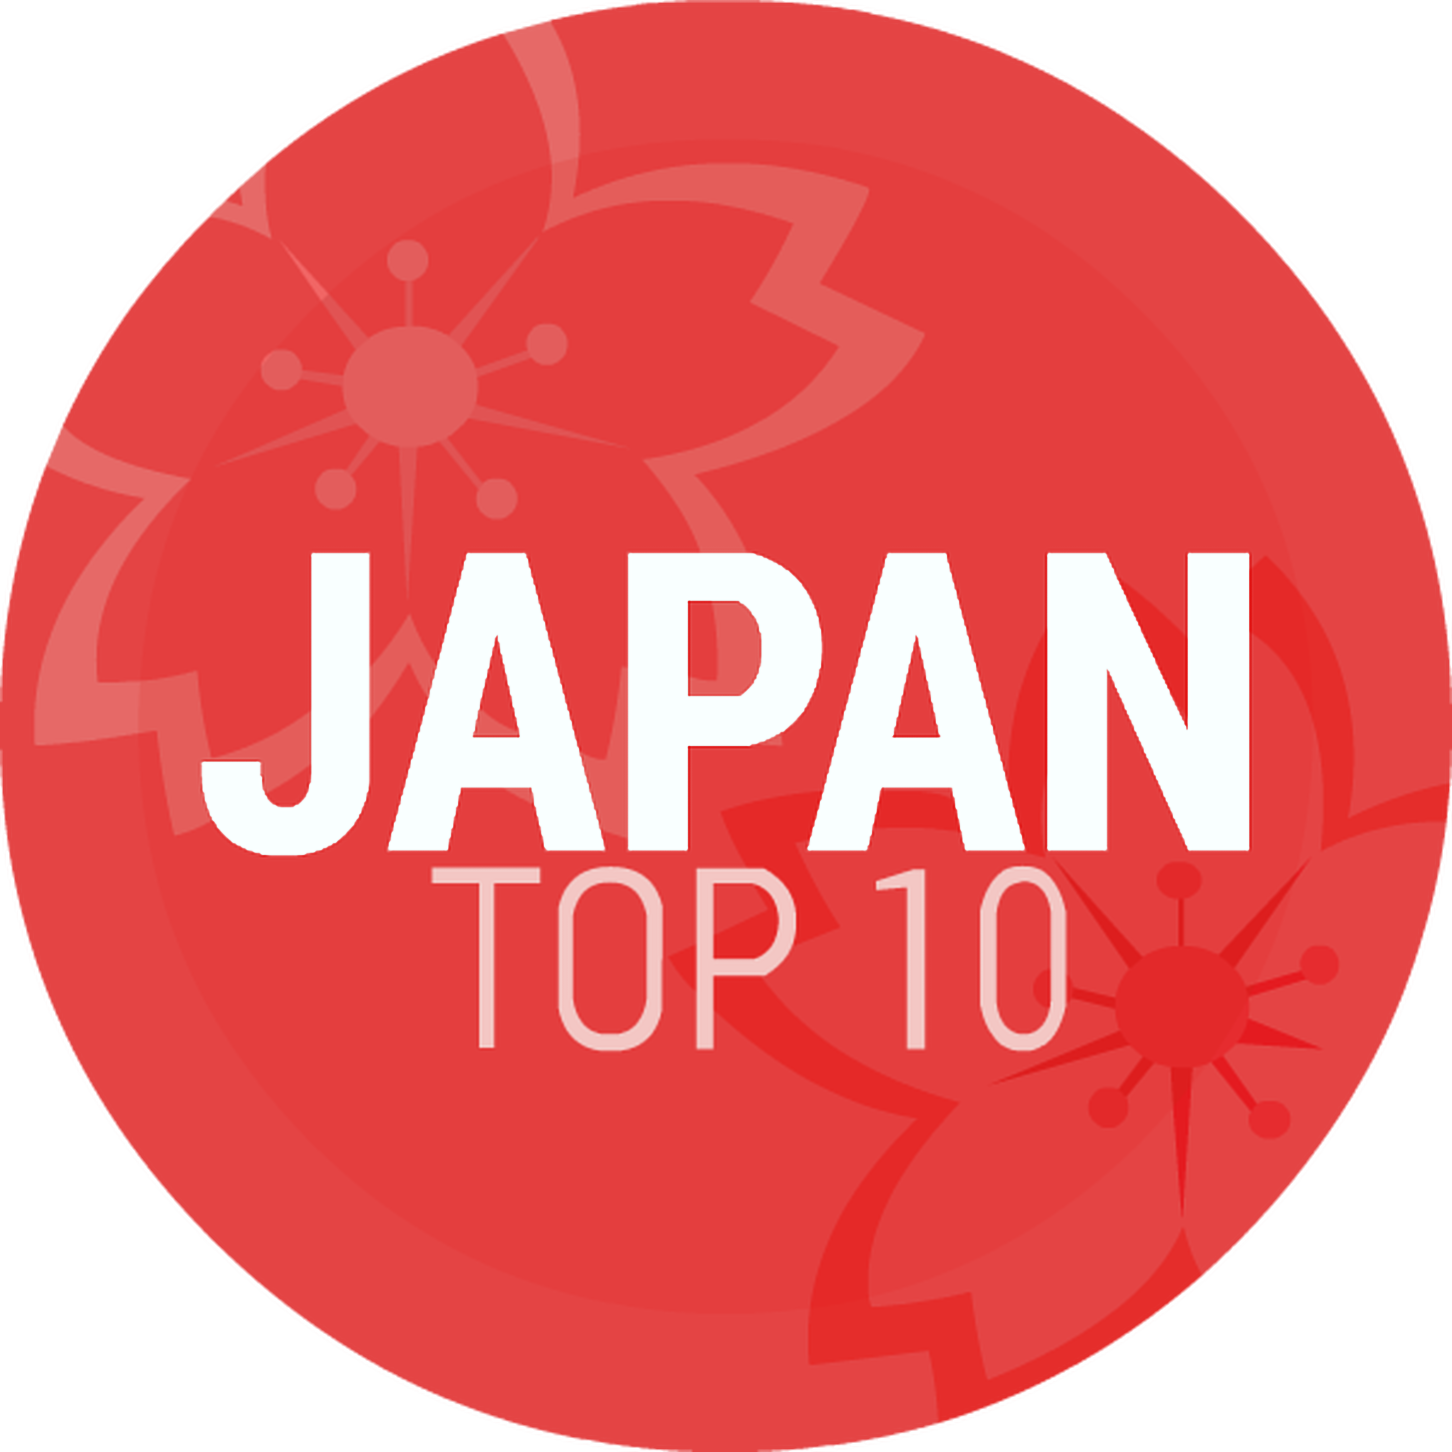 Episode 187: Japan Top 10 Early/Mid June 2017 Countdown